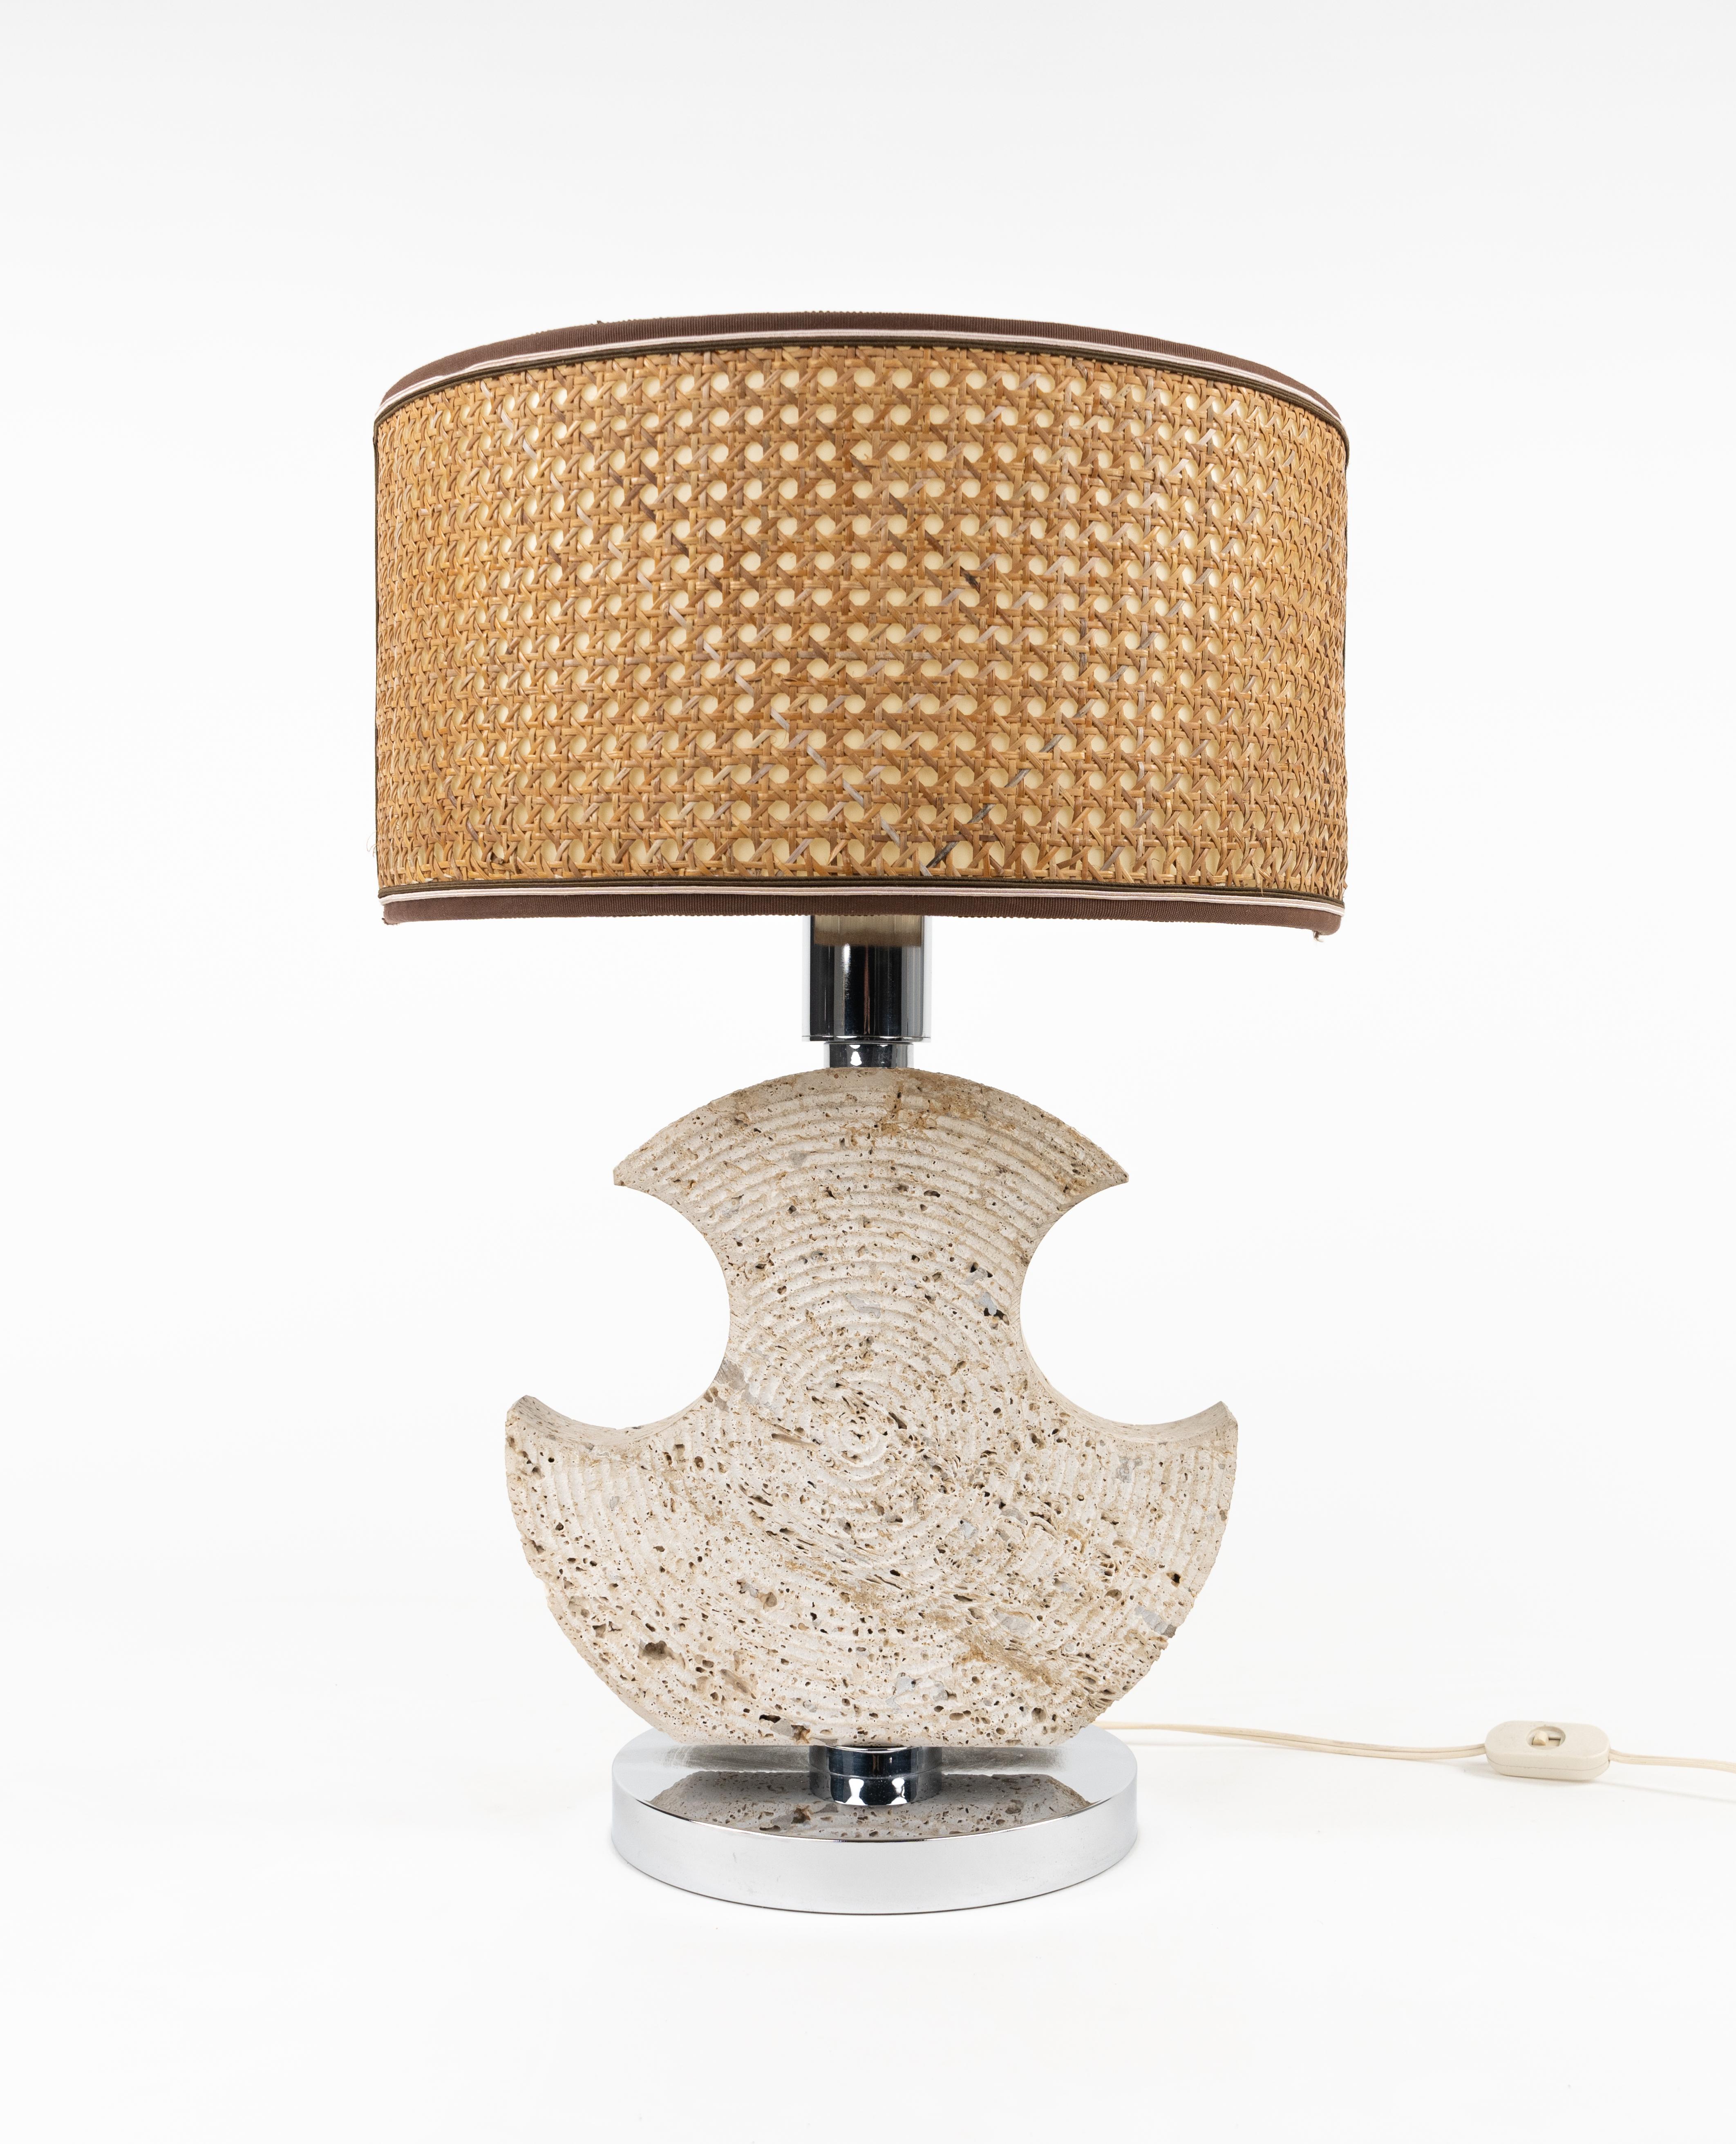 Mid-Century Modern Midcentury Table Lamp in Travertine and Chrome by Studio CE. VA. Italy 1970s For Sale